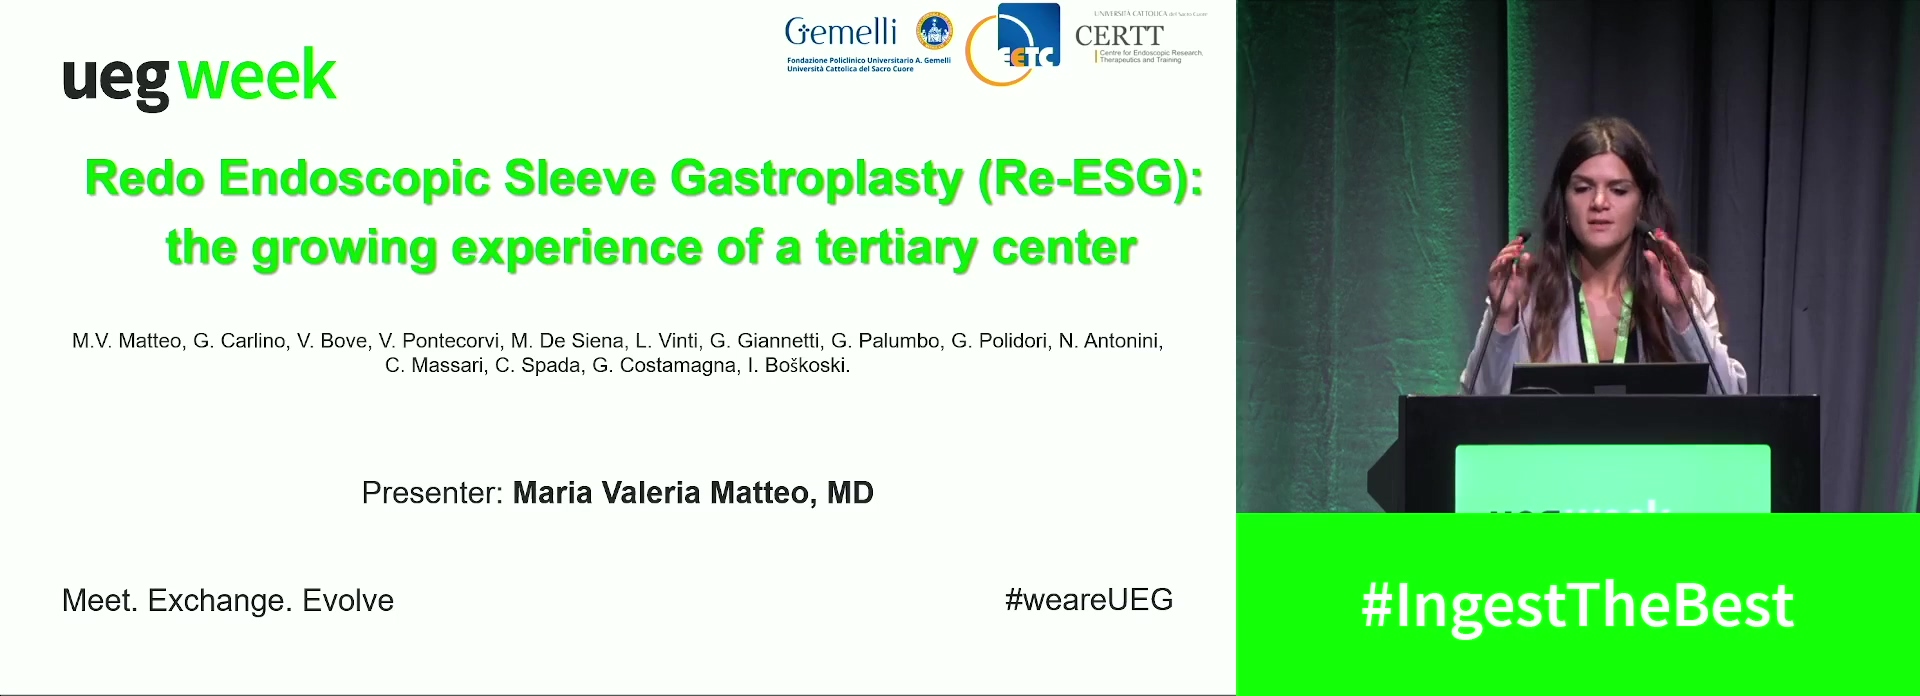 REDO ENDOSCOPIC SLEEVE GASTROPLASTY (RE-ESG): THE GROWING EXPERIENCE OF A TERTIARY CENTER